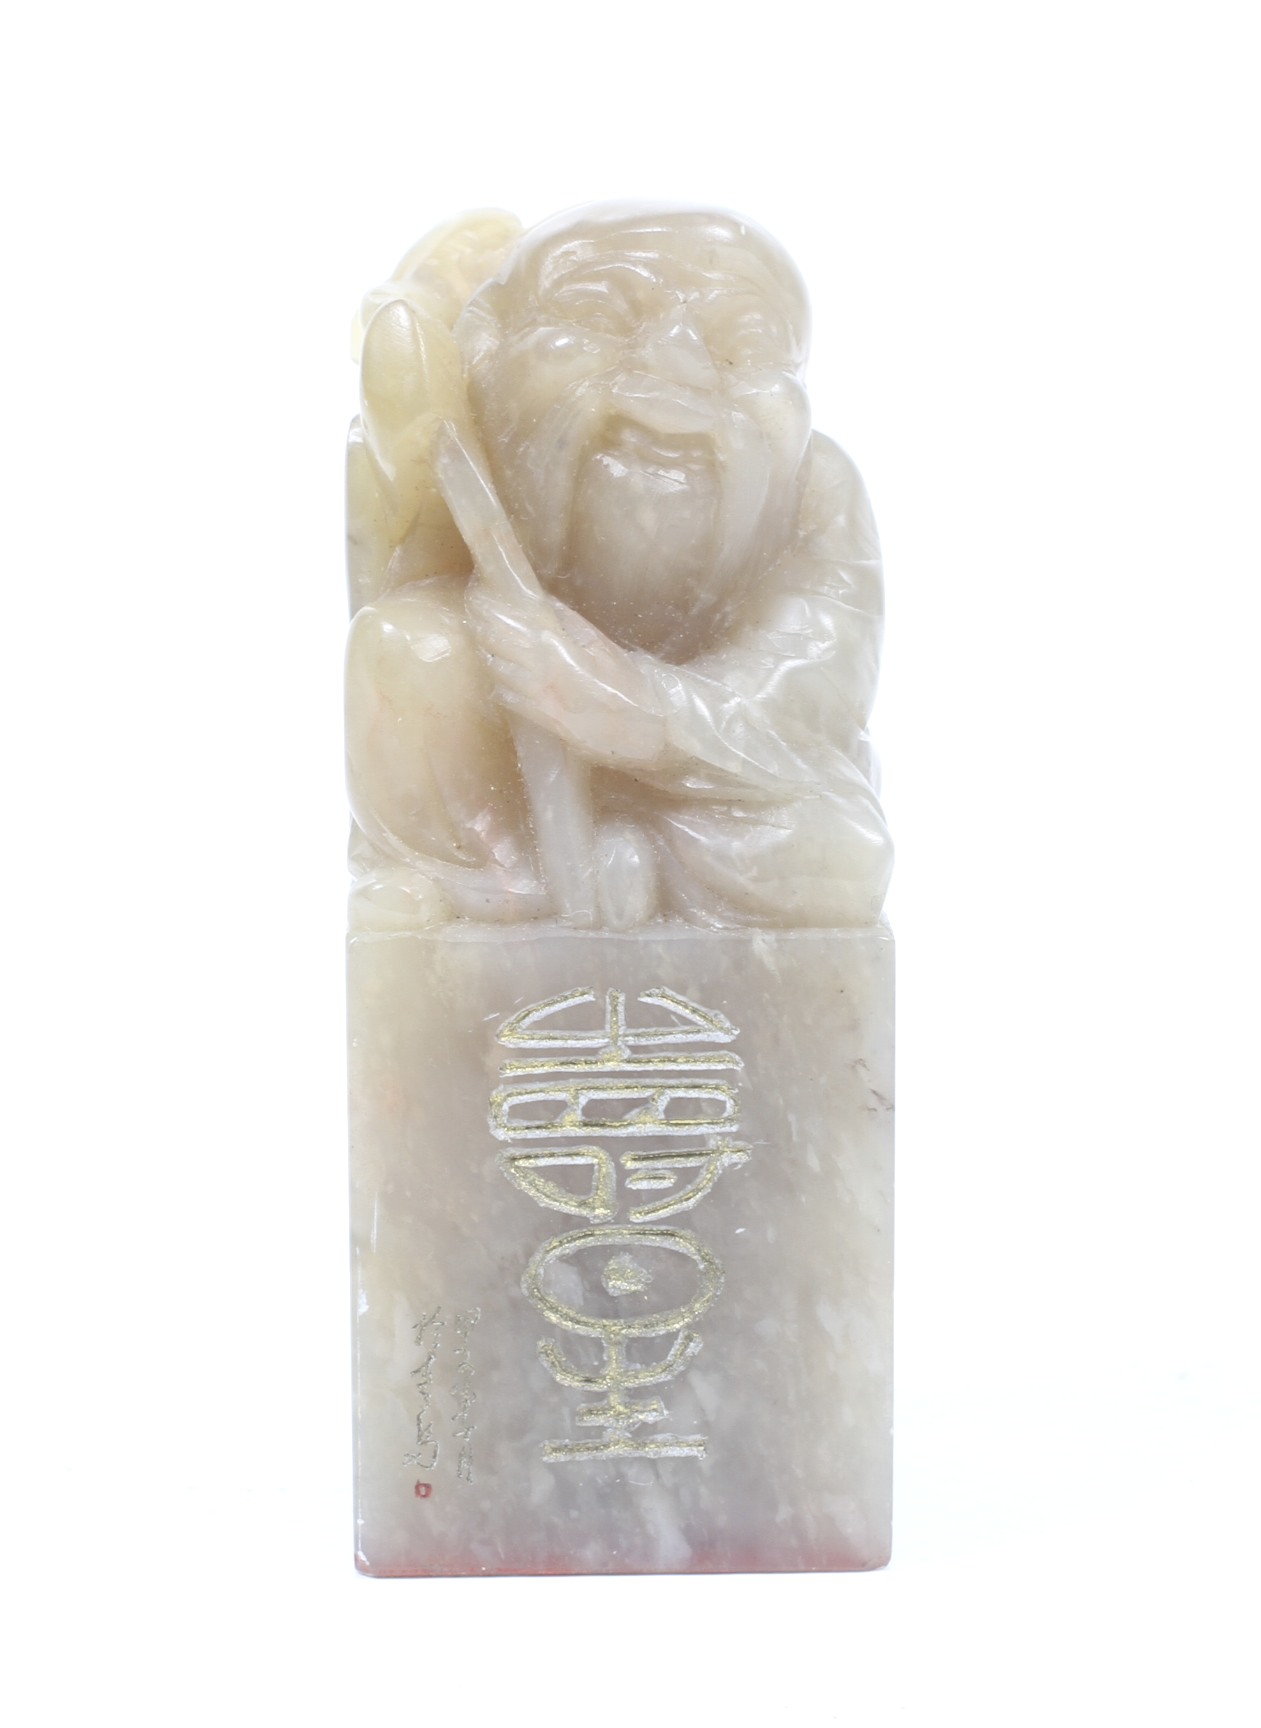 A Chinese soapstone seal carved with a crouching figure holding a branch.